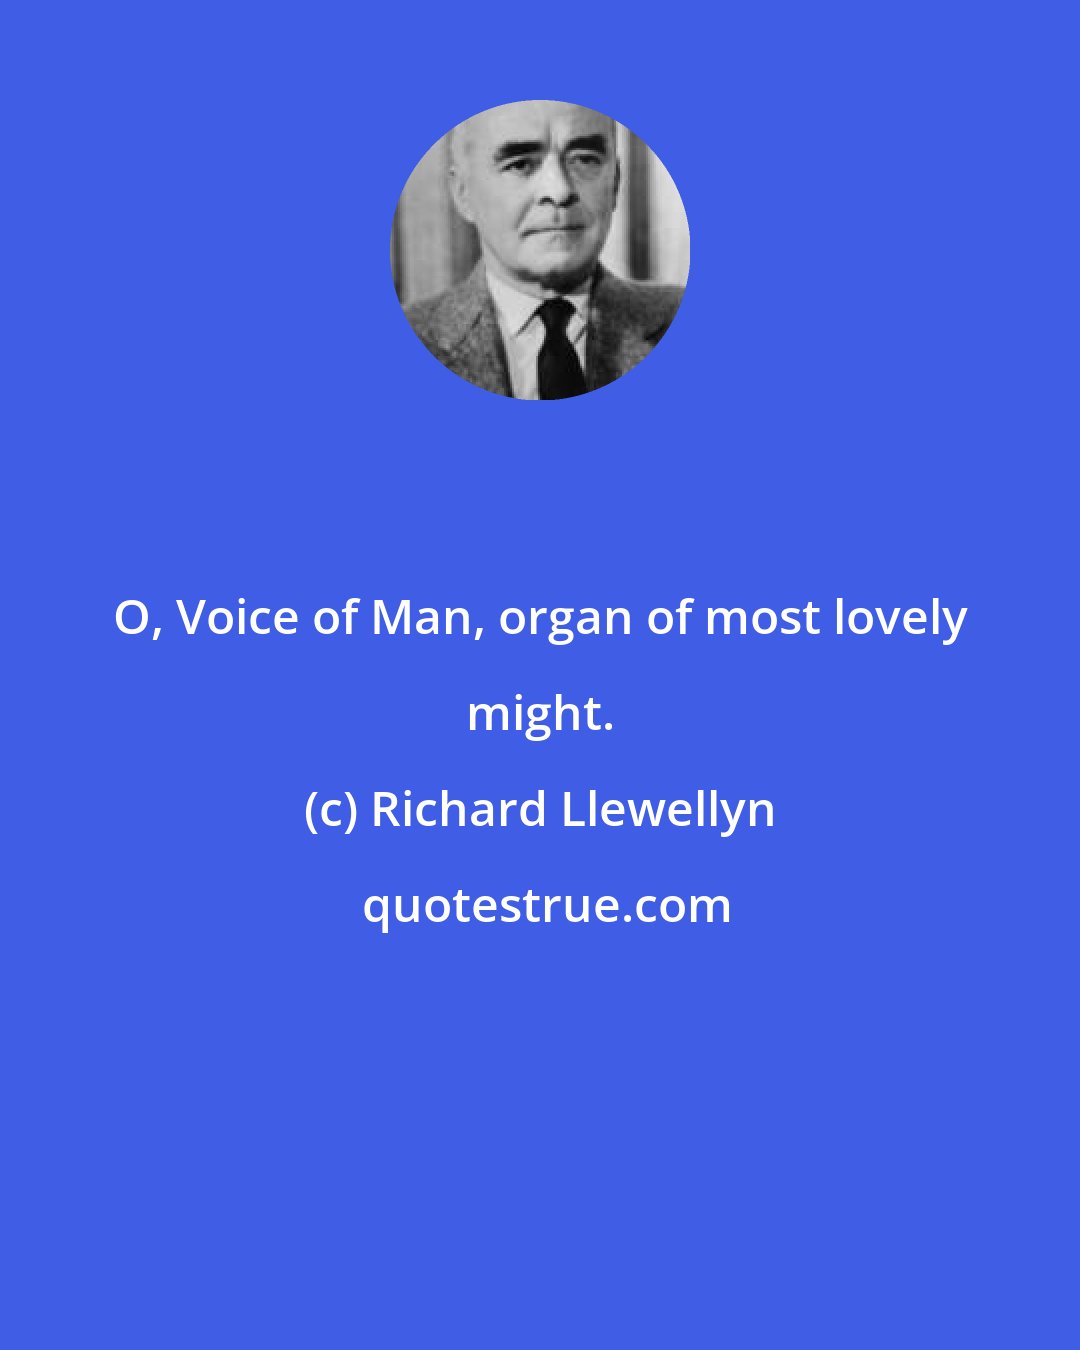 Richard Llewellyn: O, Voice of Man, organ of most lovely might.